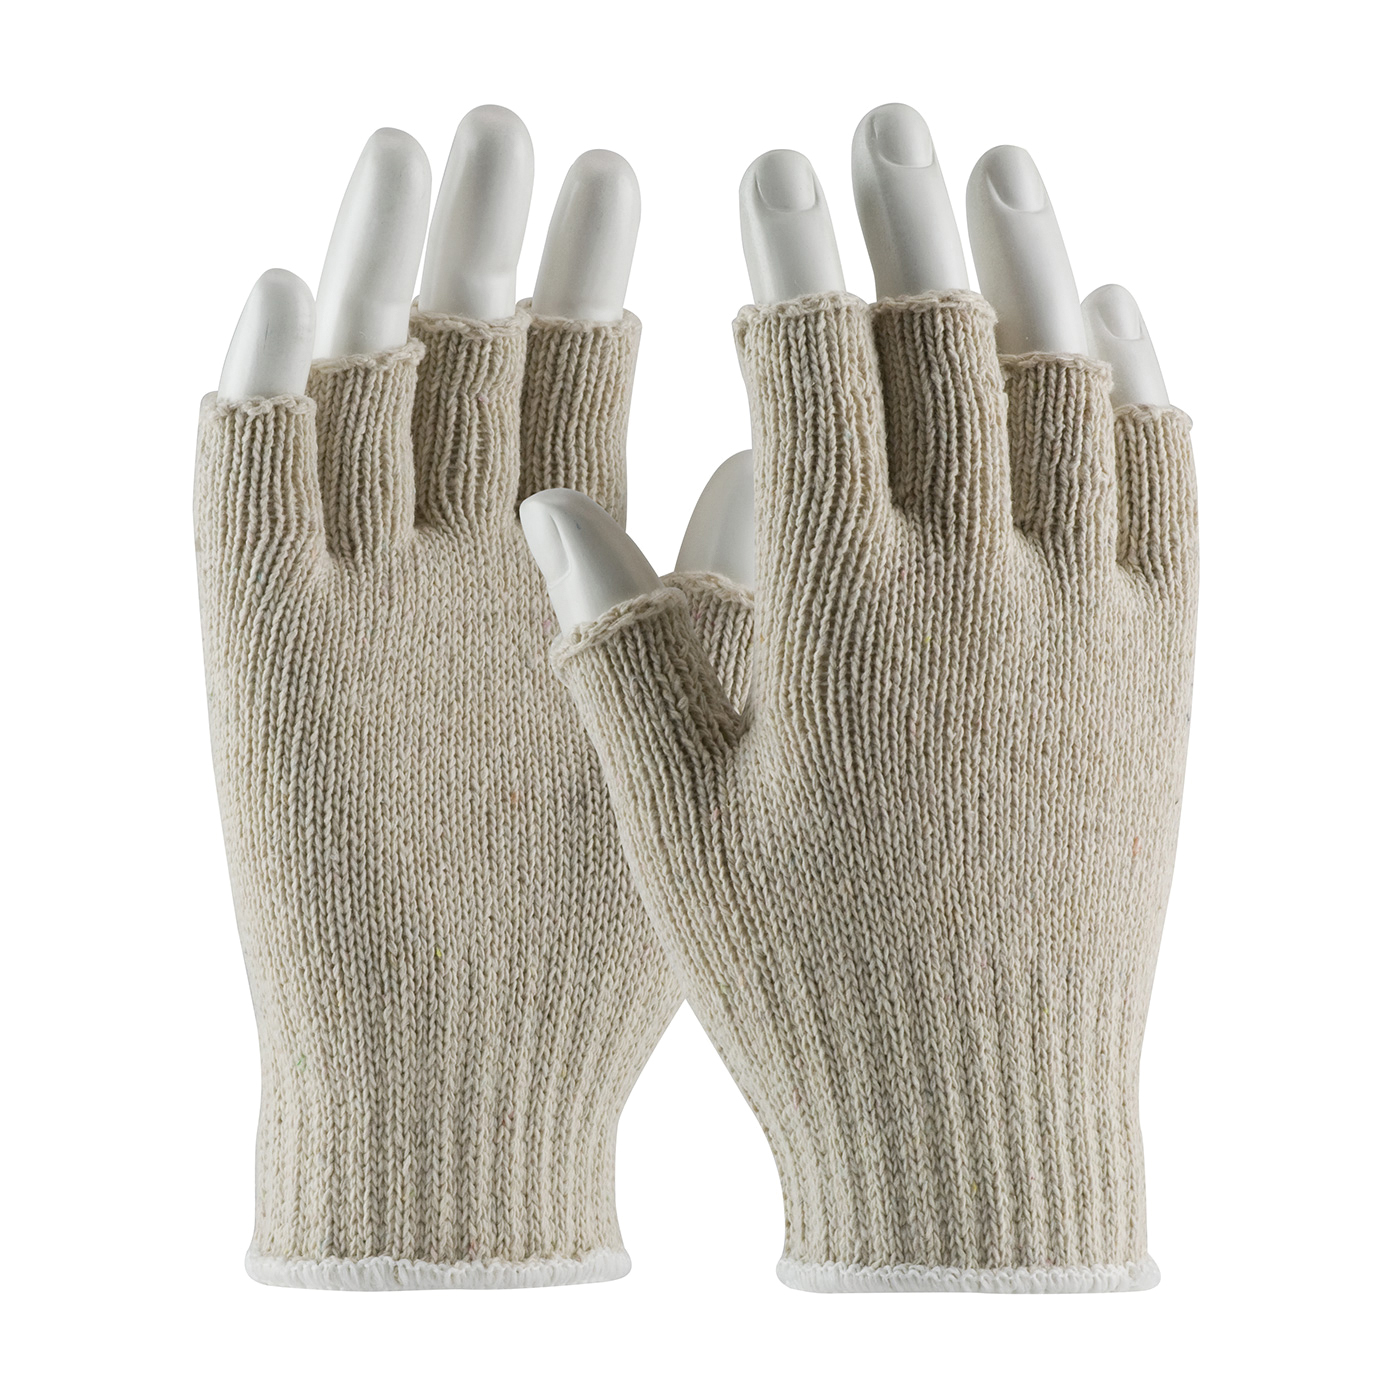 PIP® 35-C119/L 35-C119 Medium Weight General Purpose Gloves, Seamless Style, L, Cotton/Polyester Palm, 65% Cotton/35% Polyester, Natural, Continuous Knit Wrist Cuff, Uncoated Coating, Cotton/Polyester Lining